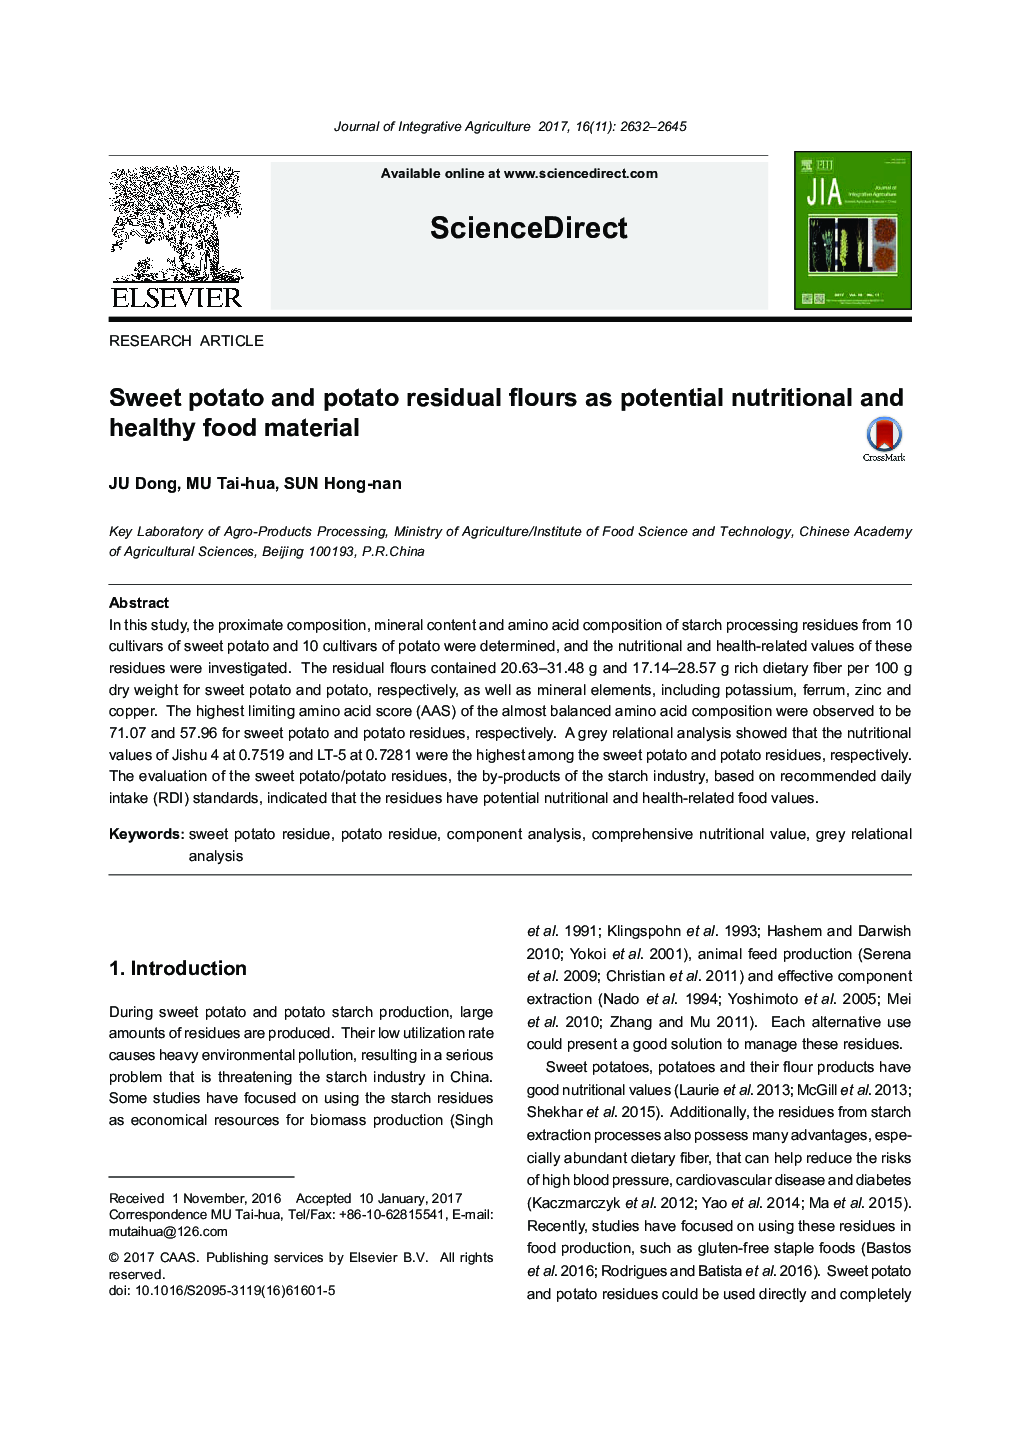 Sweet potato and potato residual flours as potential nutritional and healthy food material